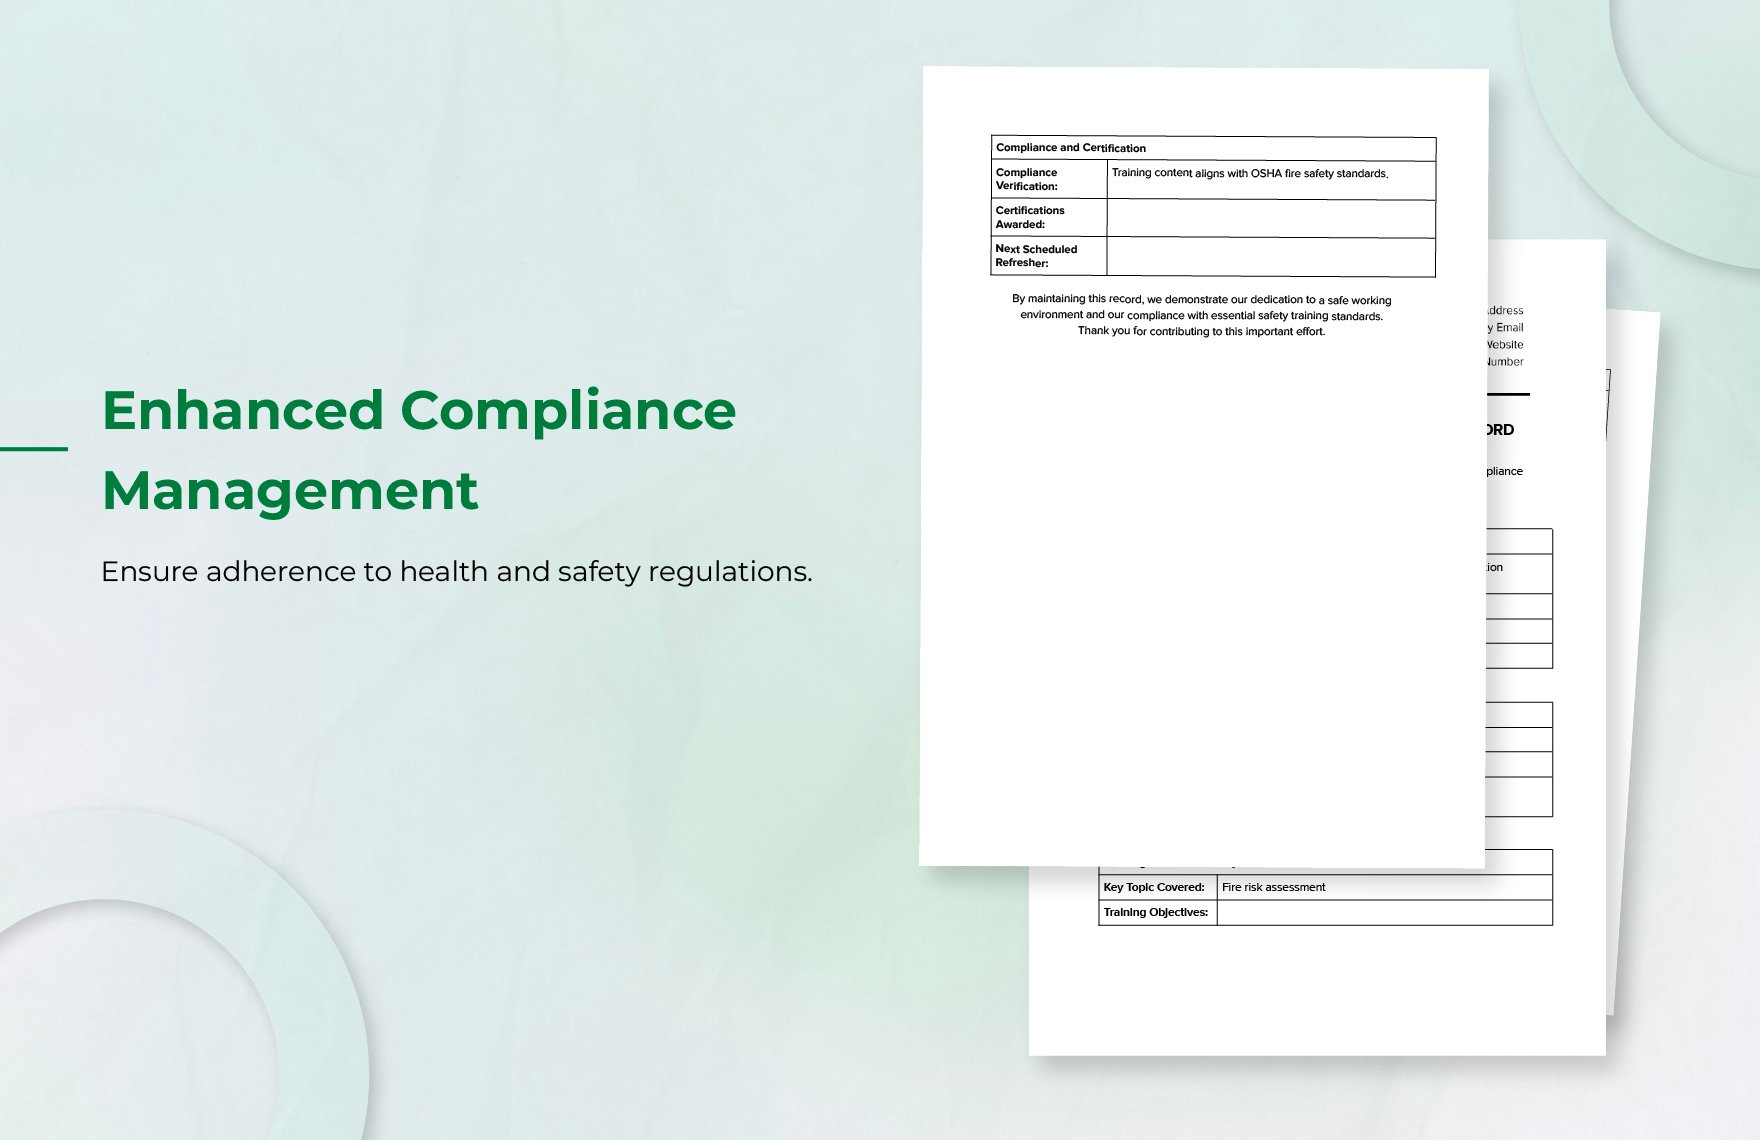 Workplace Safety Training Compliance Record Template